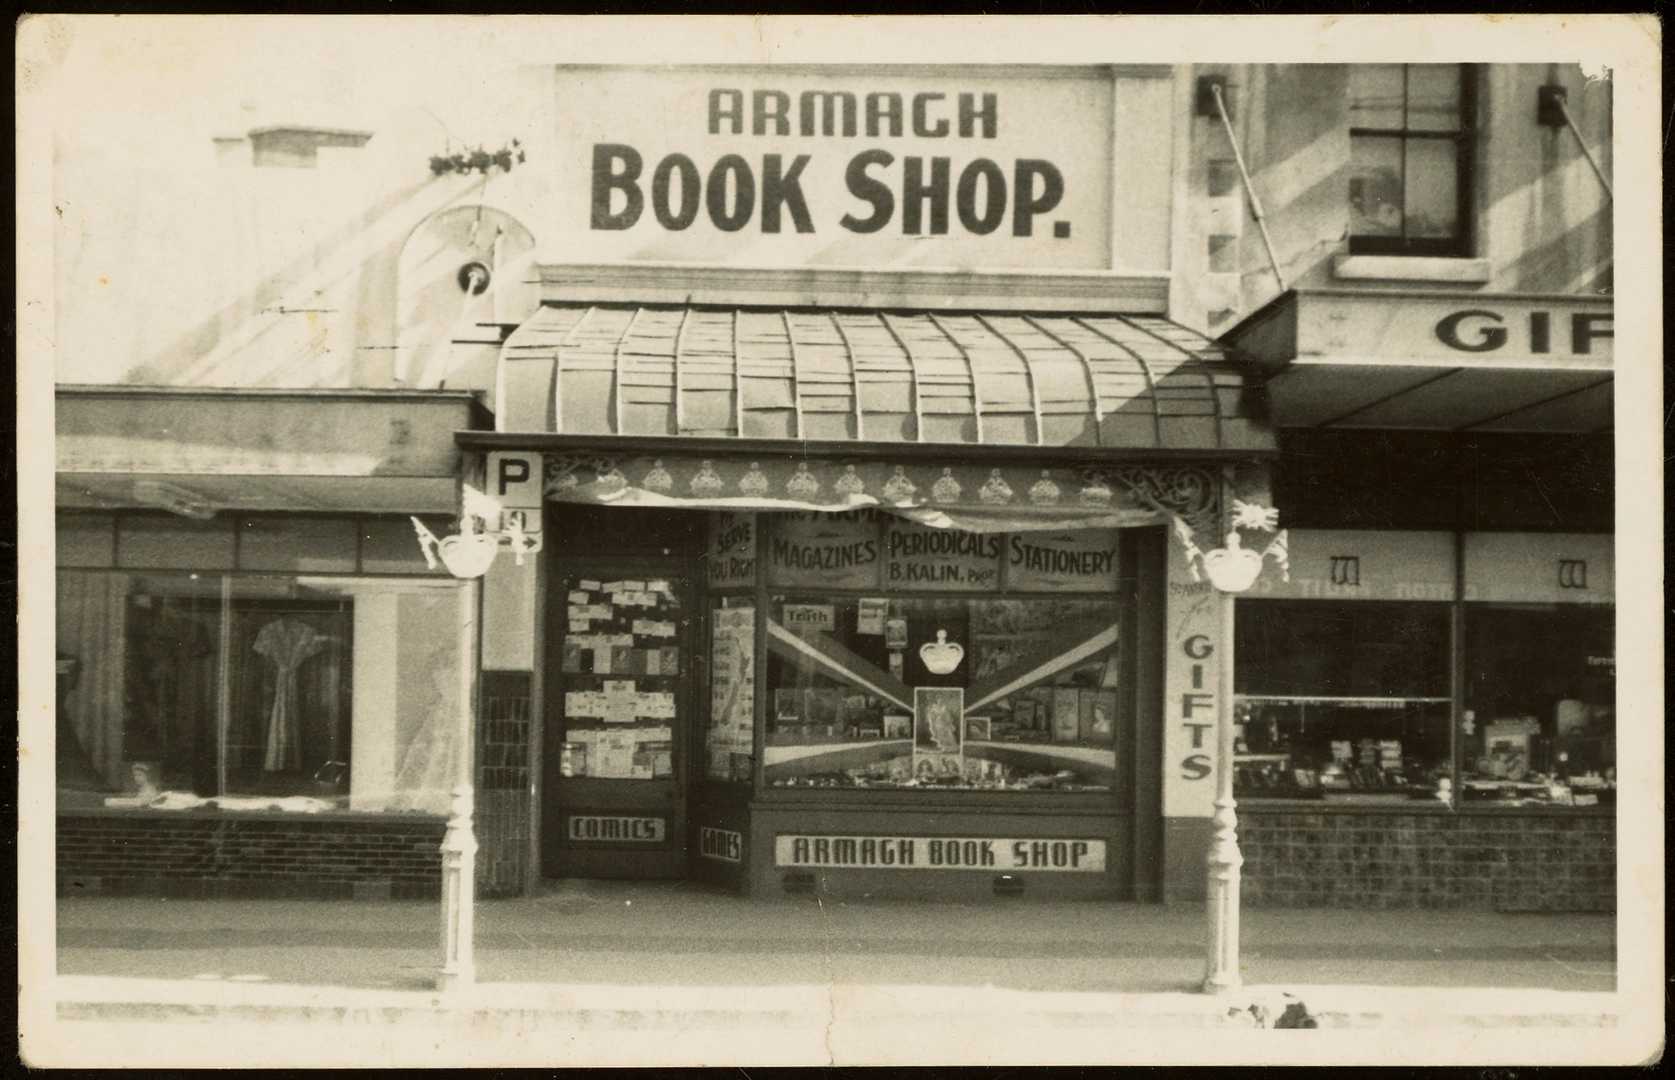 Store decorations for Royal Visit, Book Shop, Armagh Street